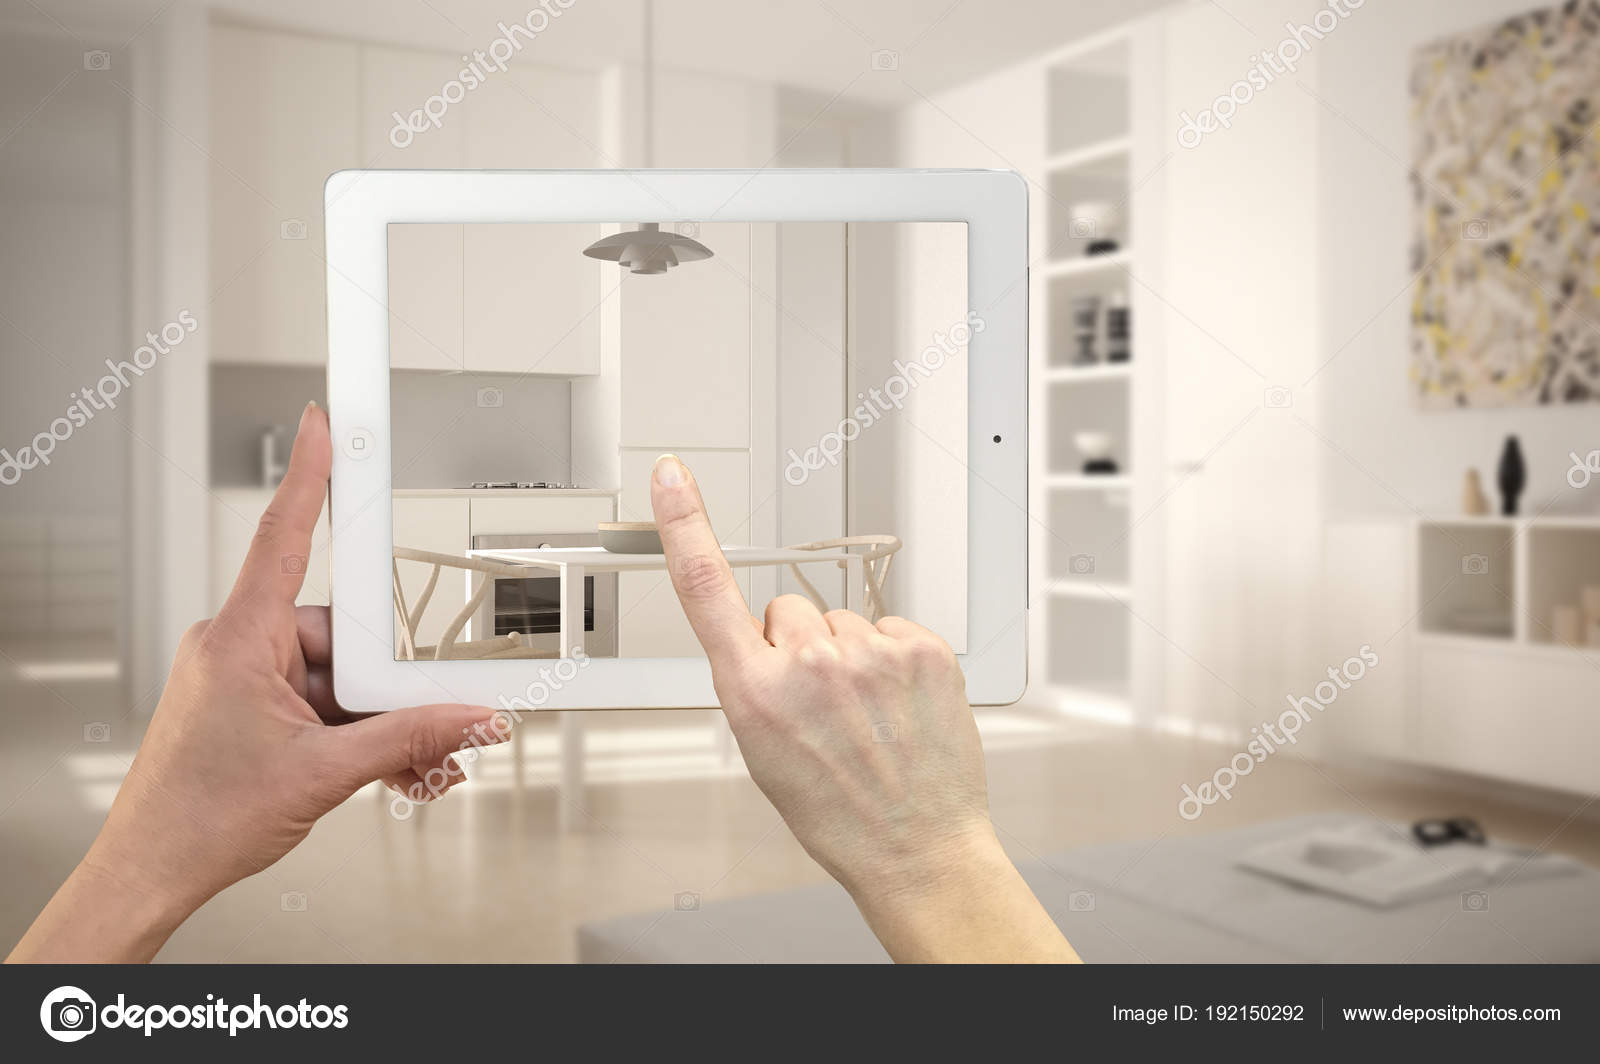 Hands Holding And Pointing On Tablet Showing Modern Kitchen